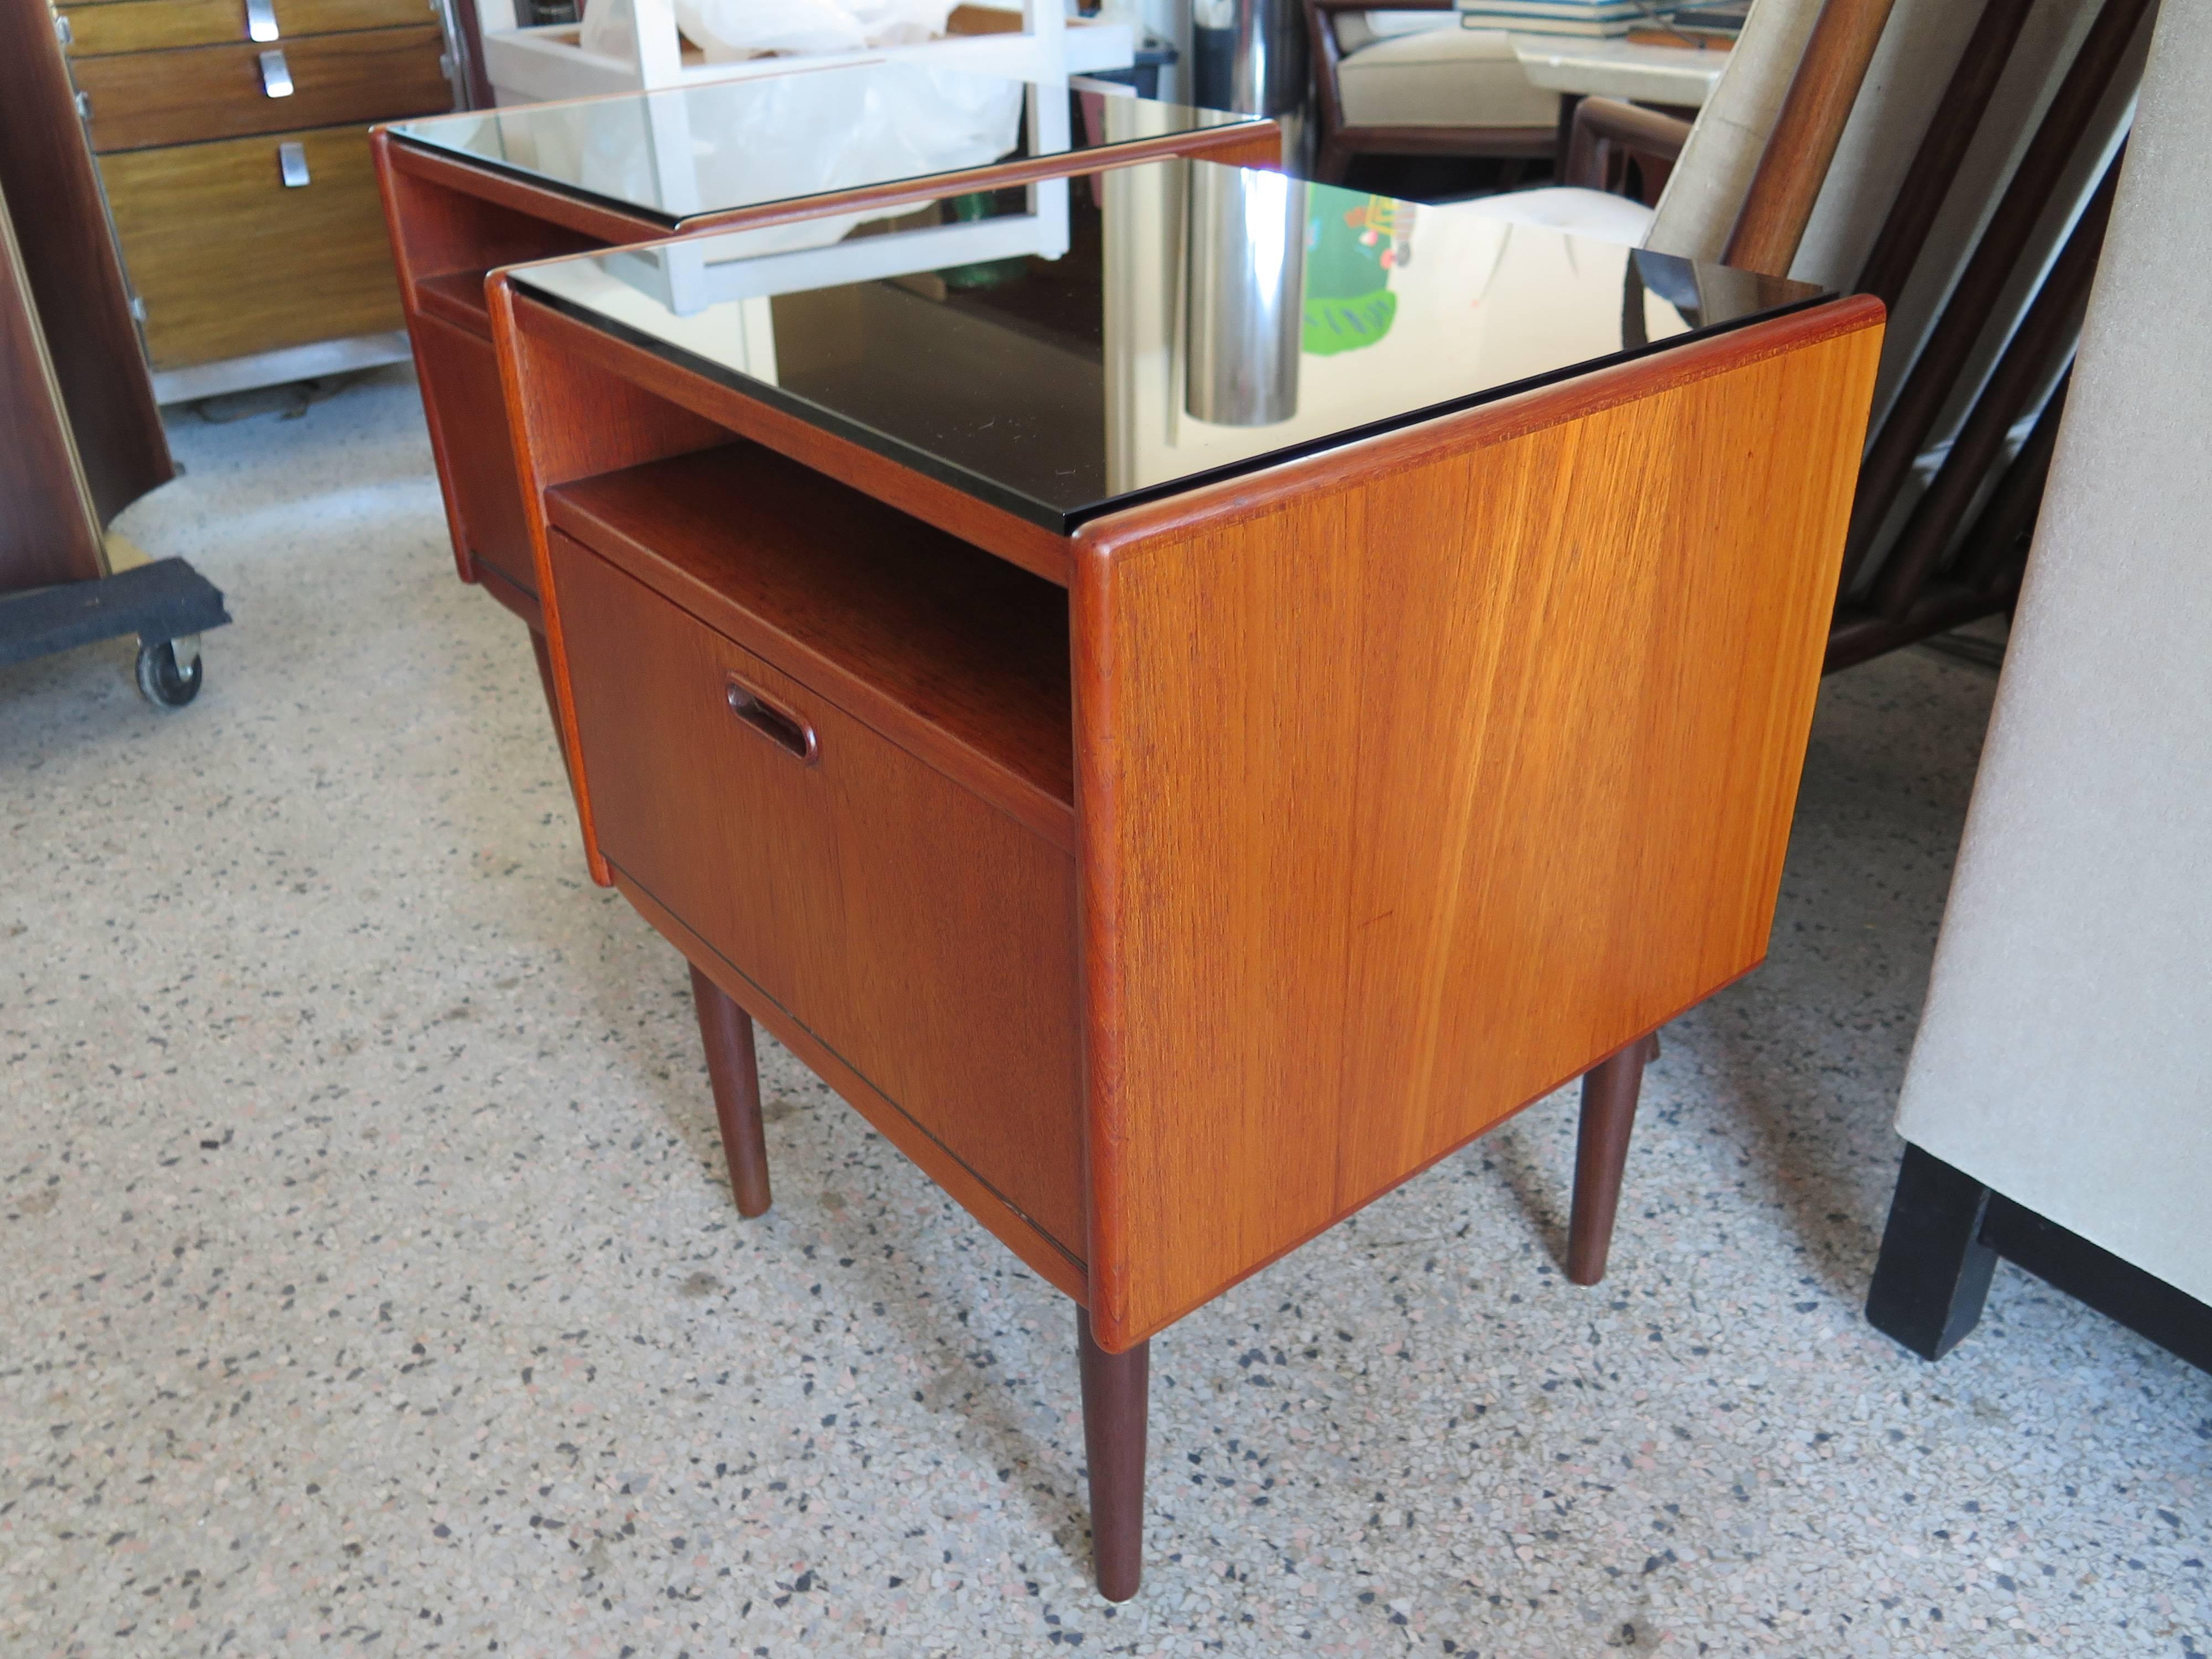 A pair of Classic night stands by Borge Mogensen for Soborg Mobler, Denmark, circa 1960s. Teak with white laminate drop fronts and glass tops. Open shelf above drop front for extra storage.